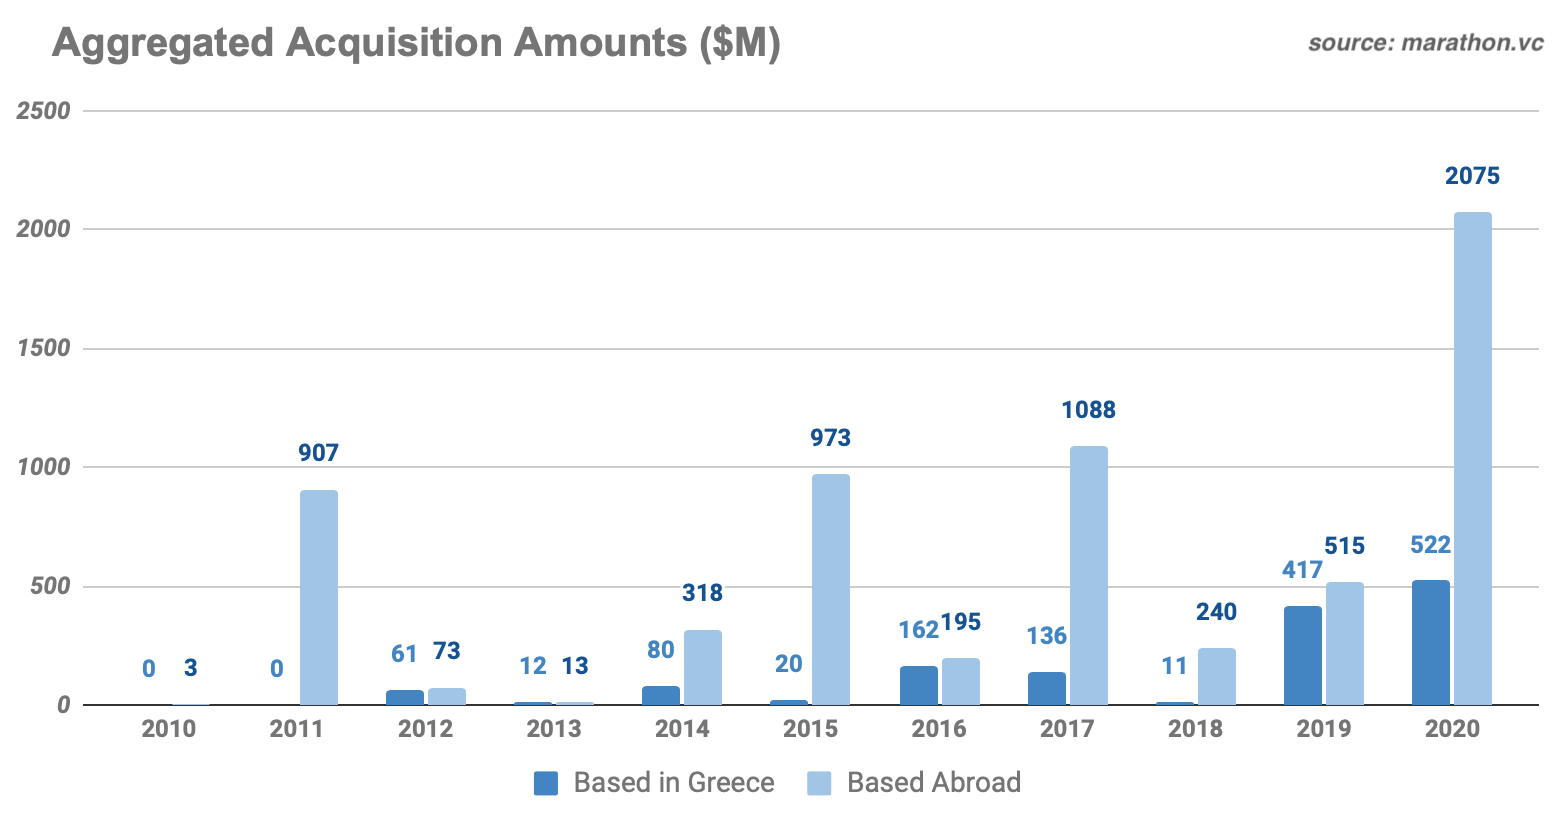 Aggregated acquisition amounts